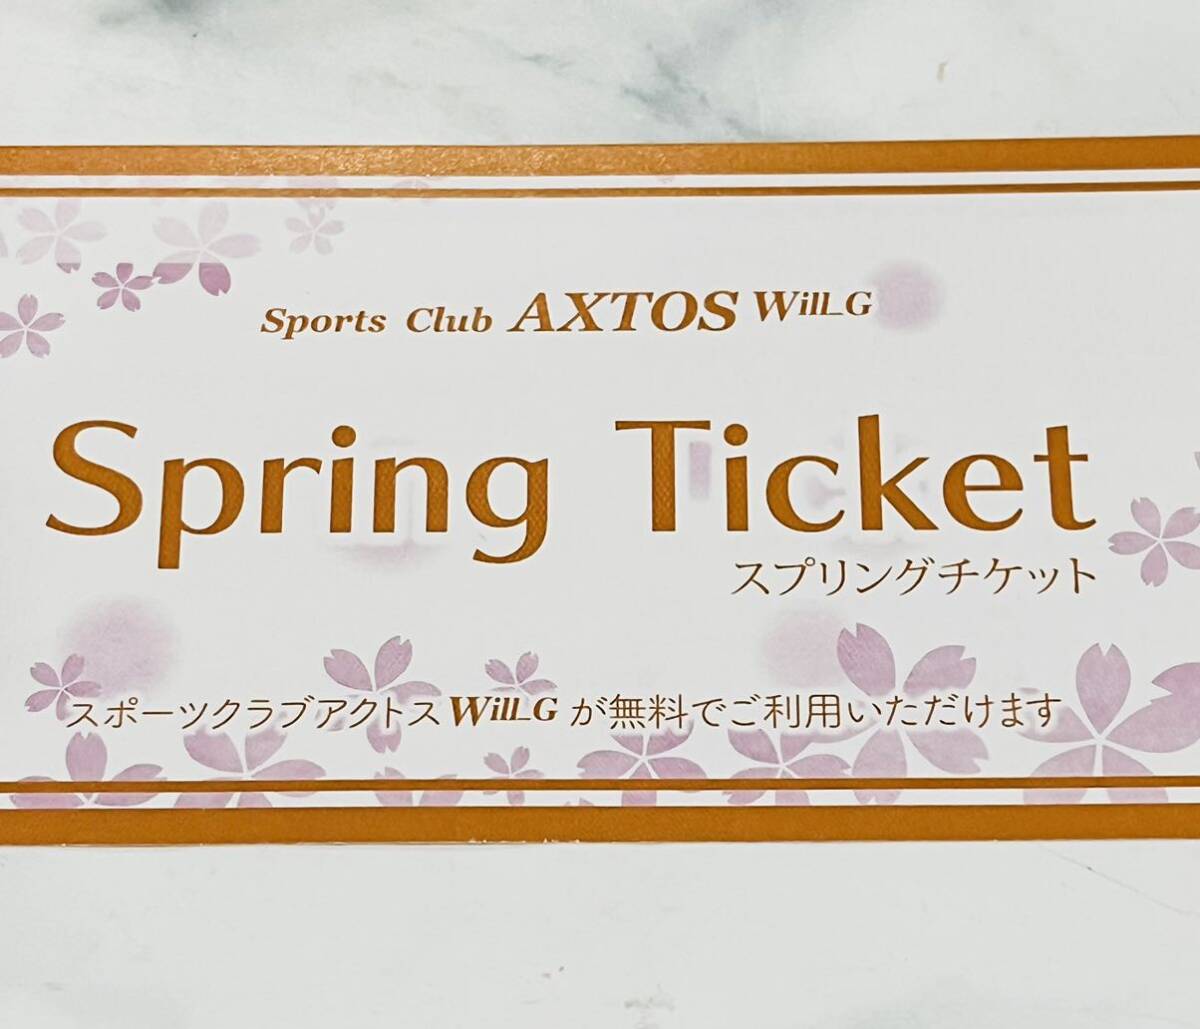 aktoswillG facilities use ticket springs ticket sport Club 1 sheets 